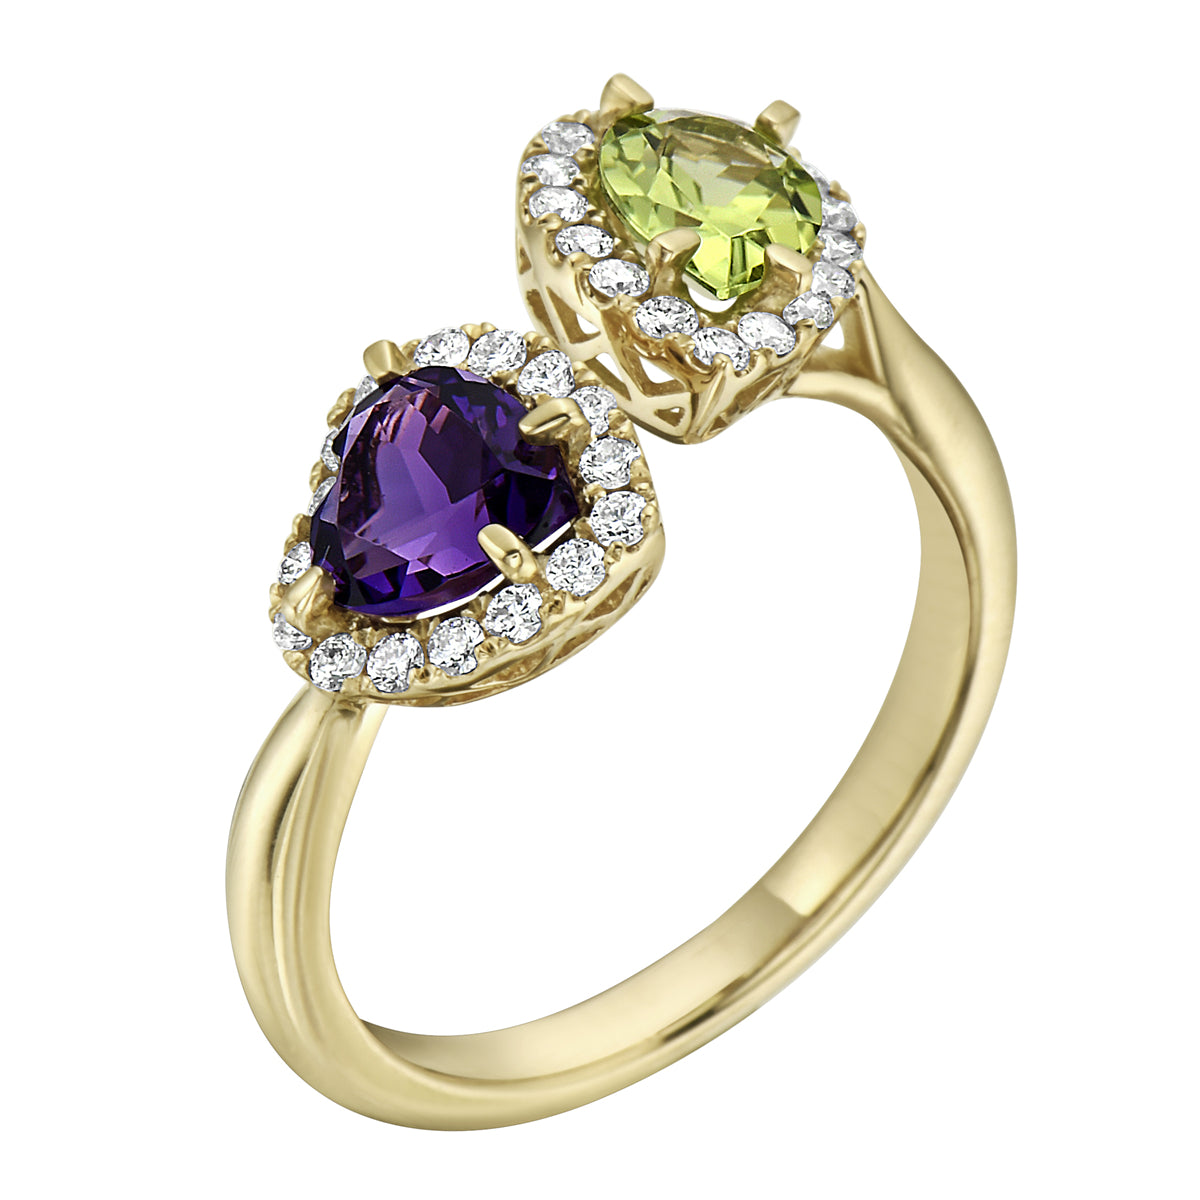 Ring 14KY/3.4G 1PER-0.67CT 1AM-0.77CT 32RD-0.30CT Amethyst and Peridot